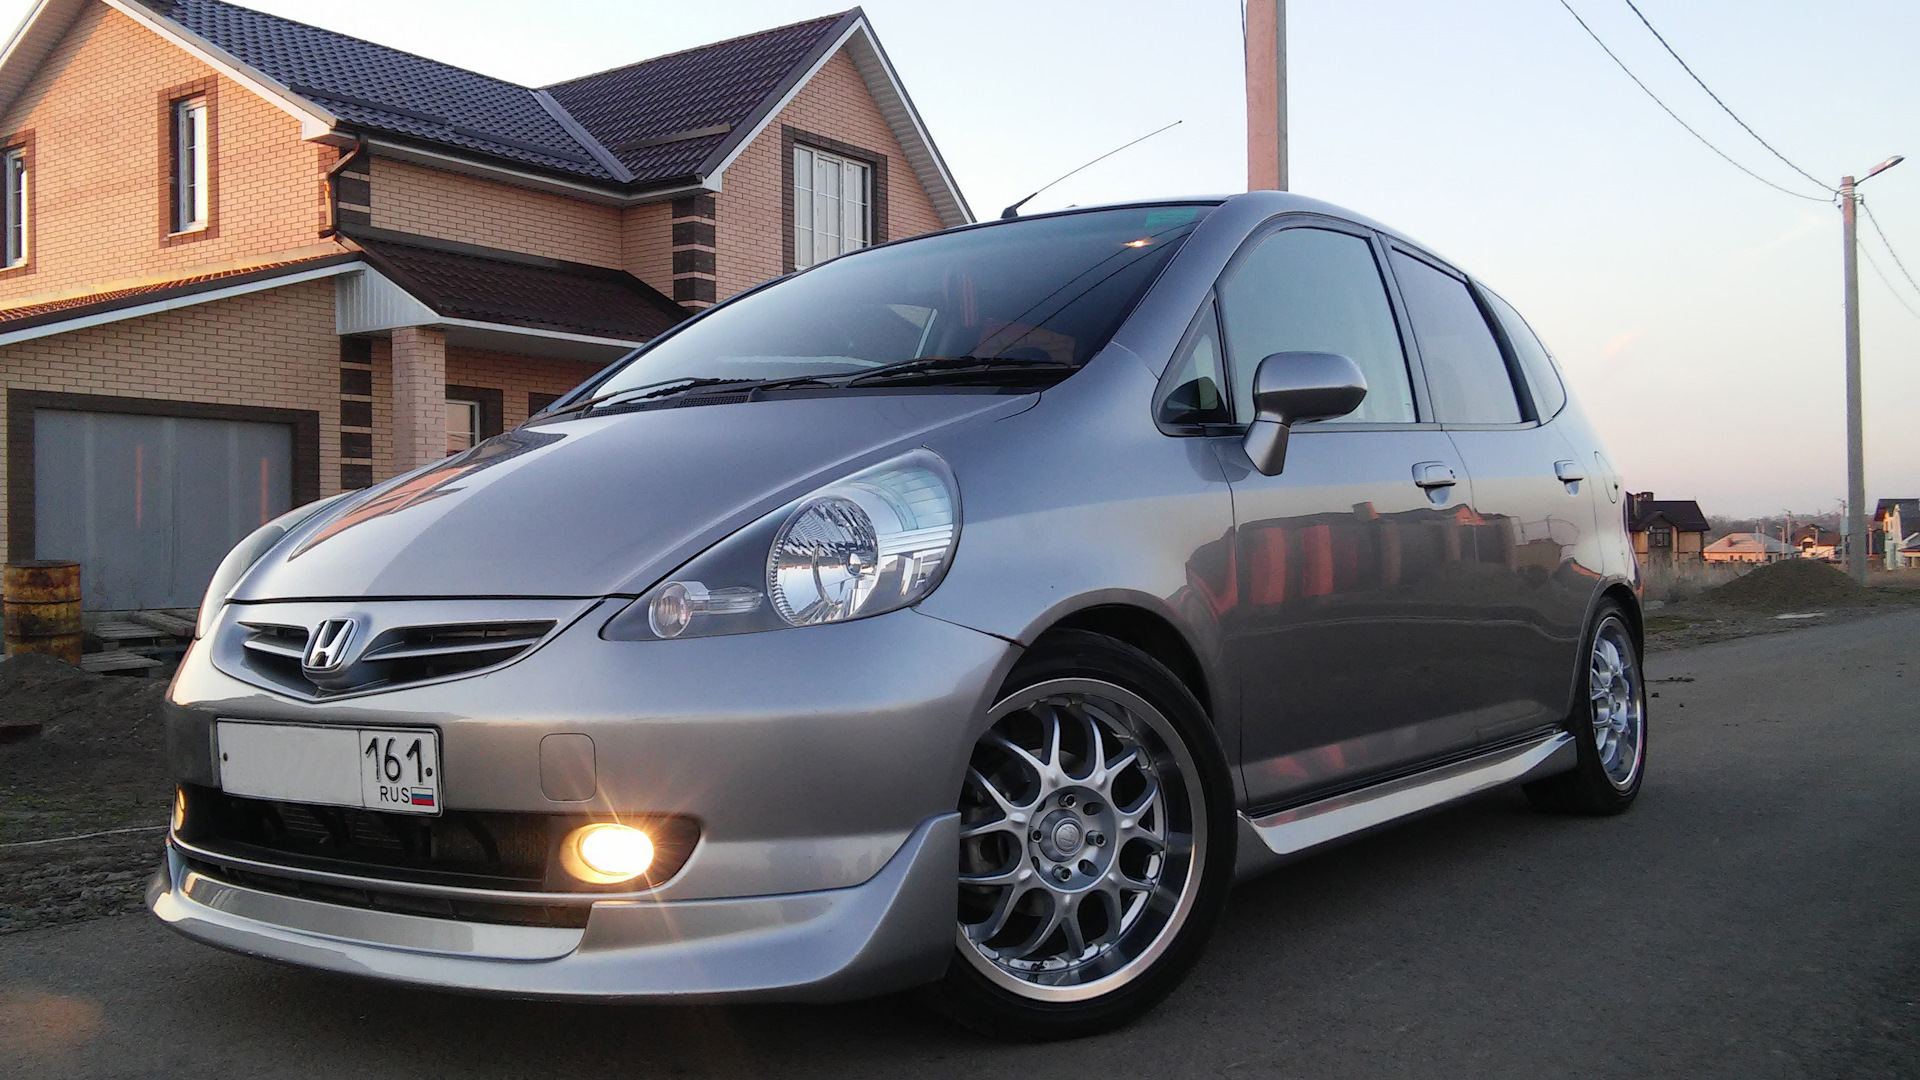 Fitter first. Honda Fit 1.5. Хонда фит 2005 1.5. Honda Fit 2005 Tuning. Хонда фит 2005.